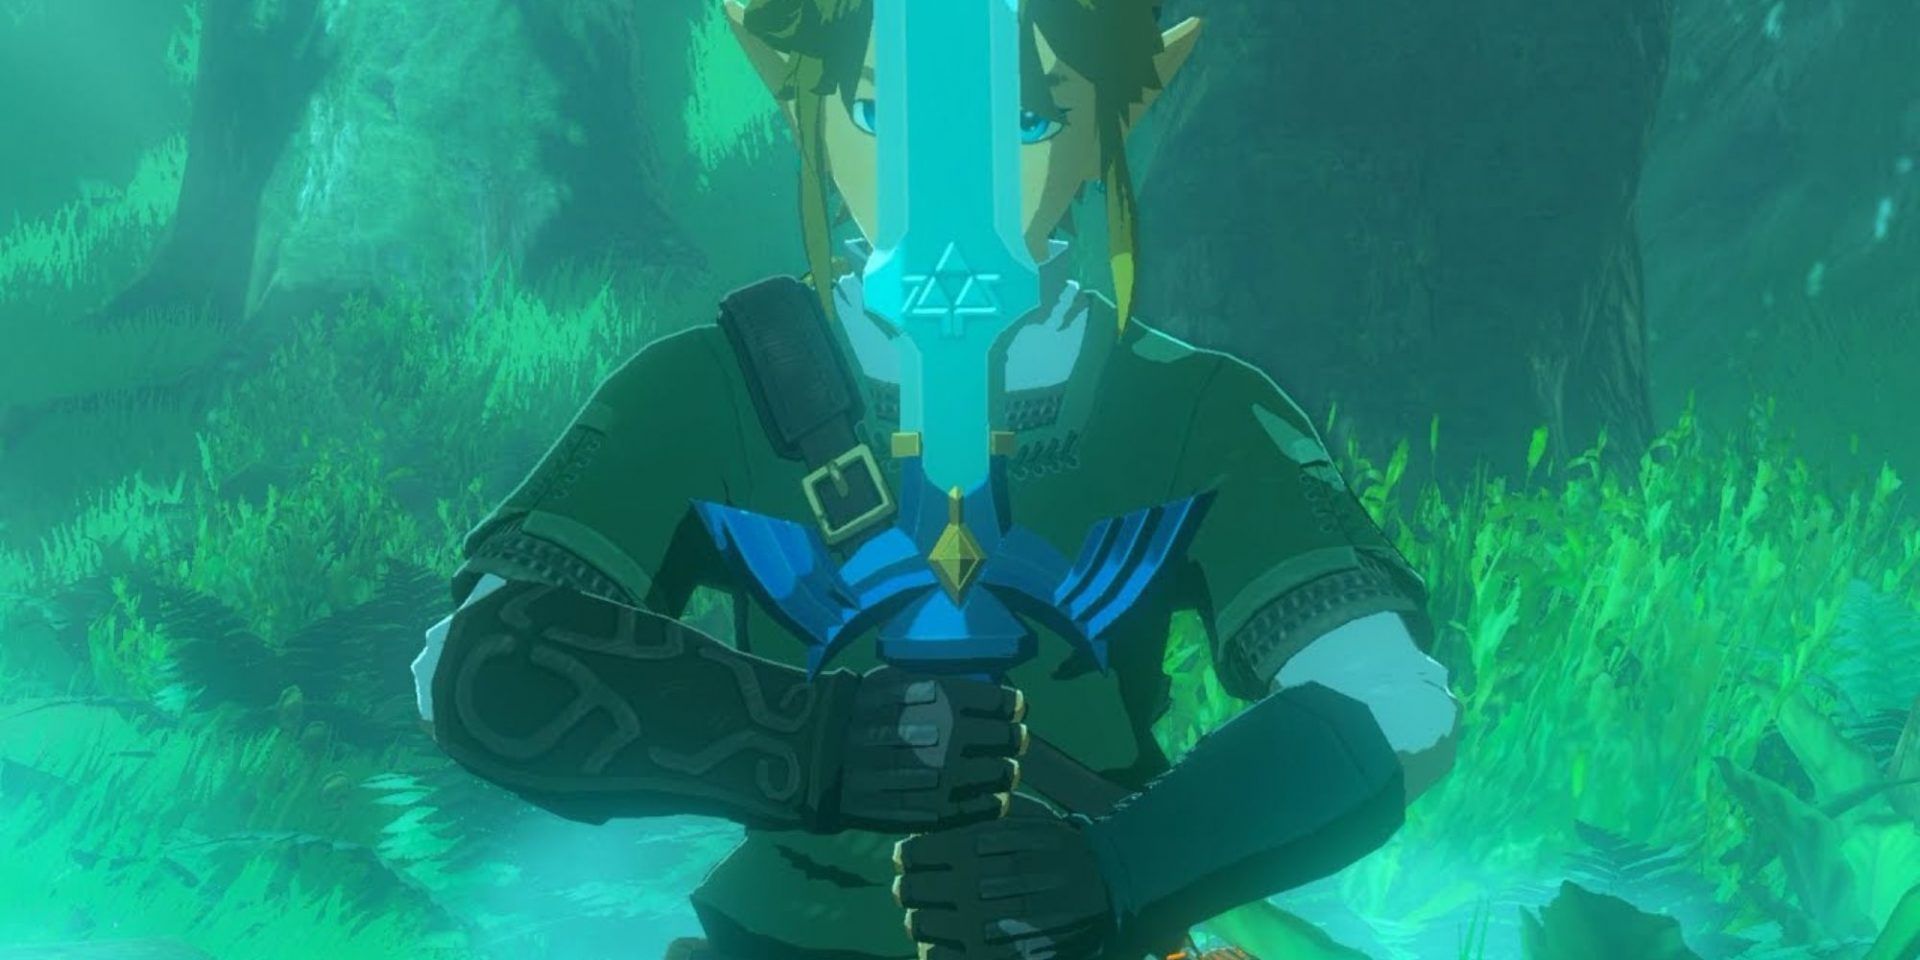 Link holding the Master Sword in Breath of the Wild